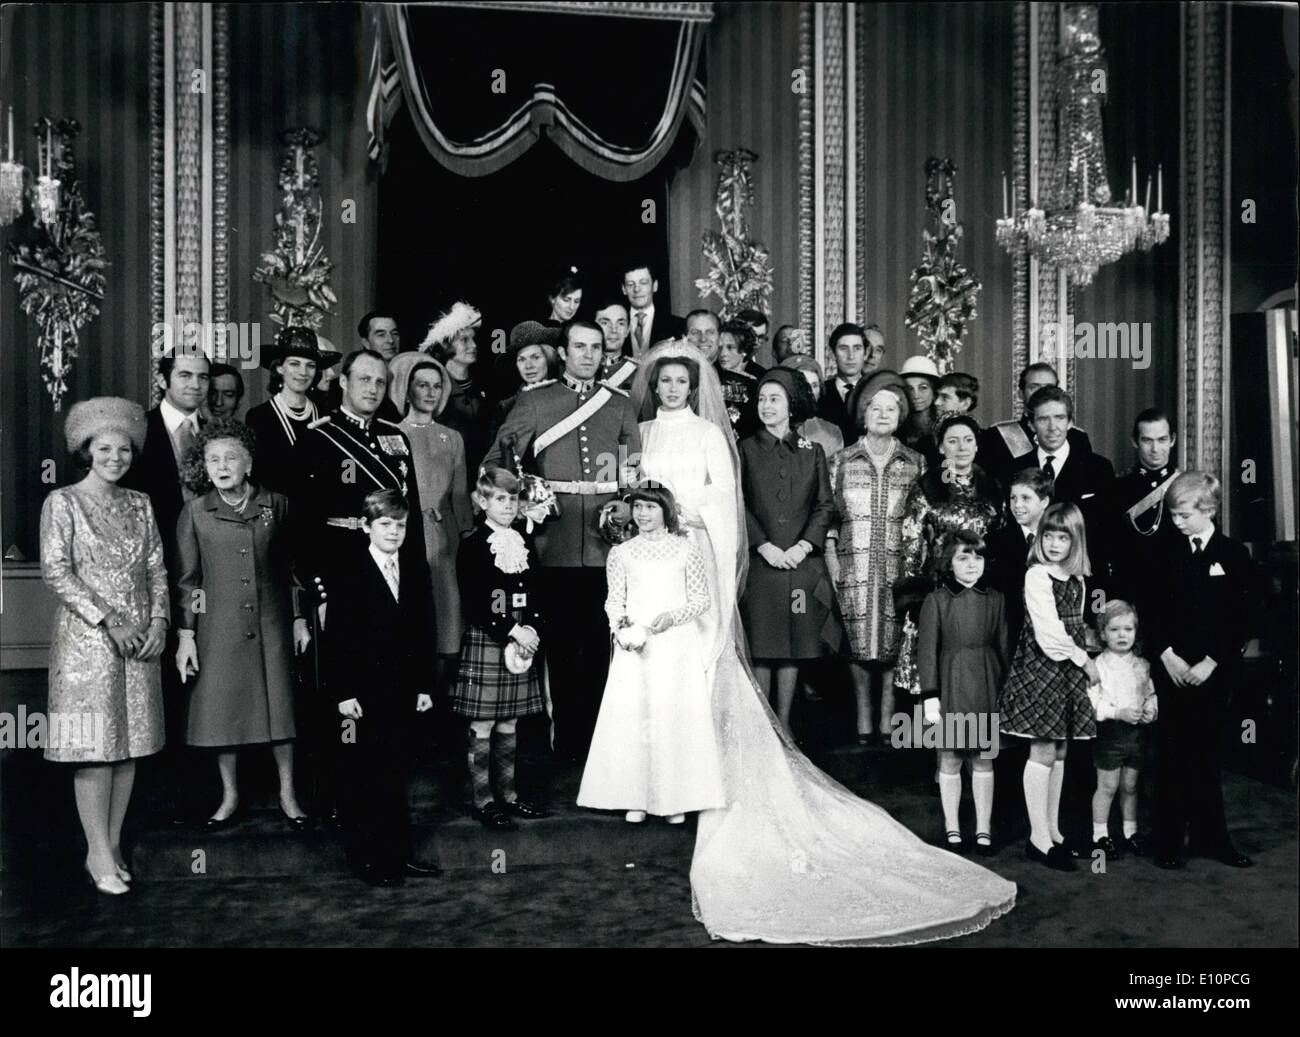 Nov. 11, 1973 - Royal Wedding. Photo shows Family group in the Throne Room at Buckingham Palace. From left to right: back row Princess Alexander, Hon Angus Ogilvy. Next row forward: Miss Sarah Phillip (obscured) Mr Phillips, Mrs Phillips, Duchess of Kent, Eric Grounds best man, Duke of Edinburgh, Princess and Prince Richard Duke of Kent, Prince of Wales and row with bride and groom: King Constantine, Prince Claus, Queen and Marie Prince and Princess of Norway, Bridegroom and Bride the Queen, The Queen Mother and Prince Andrew with behind them Duchess of Gloucester Stock Photo